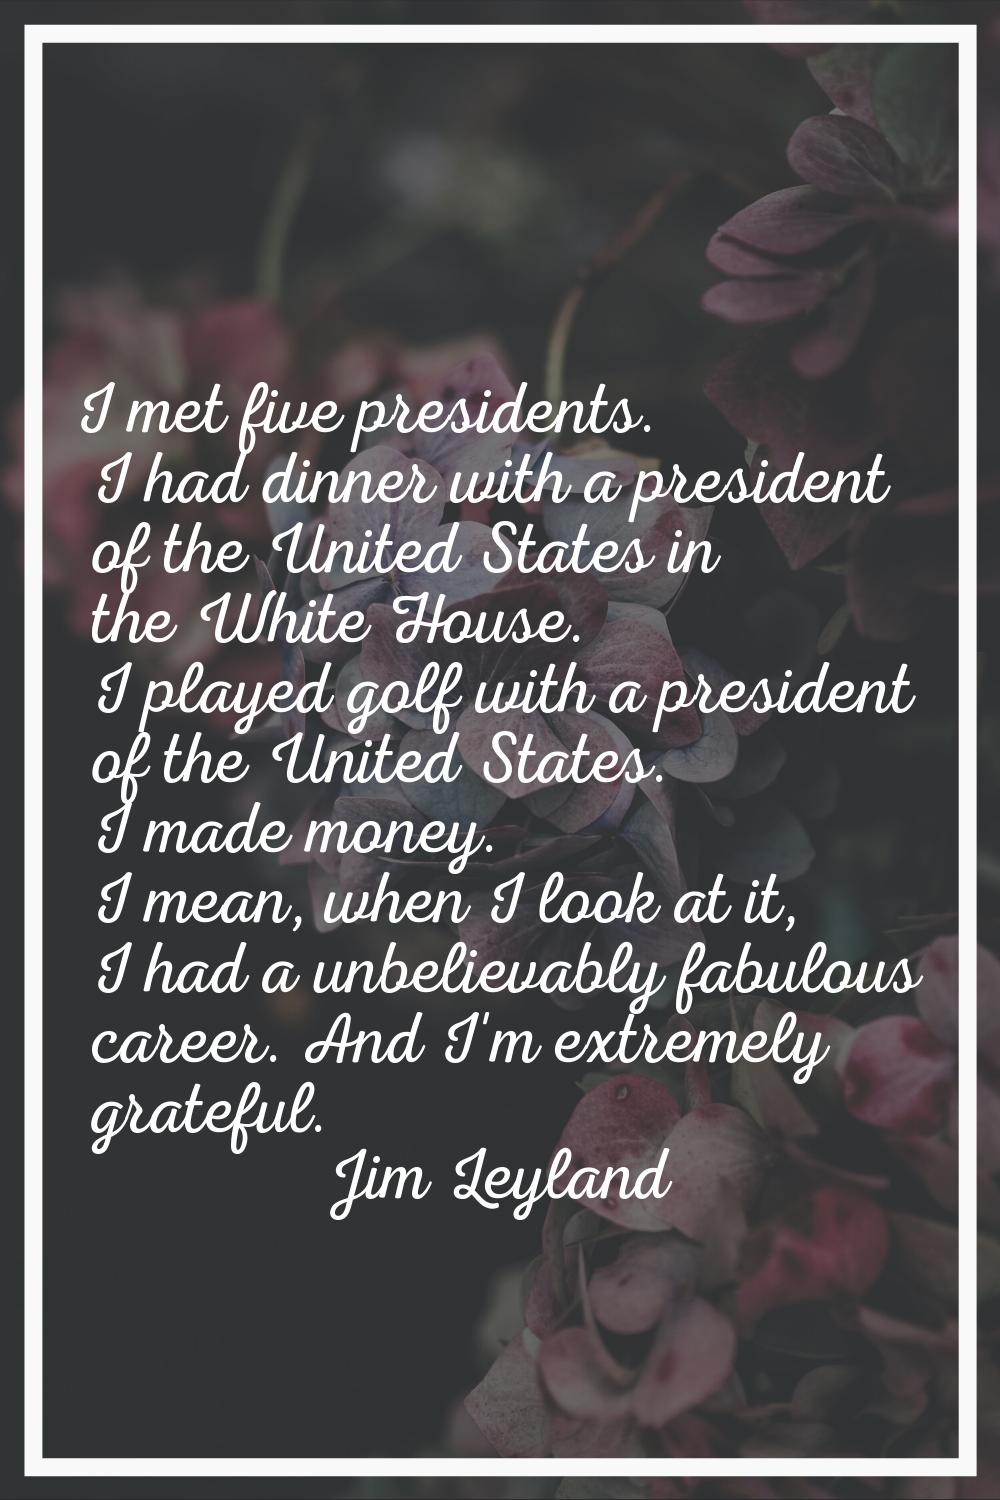 I met five presidents. I had dinner with a president of the United States in the White House. I pla